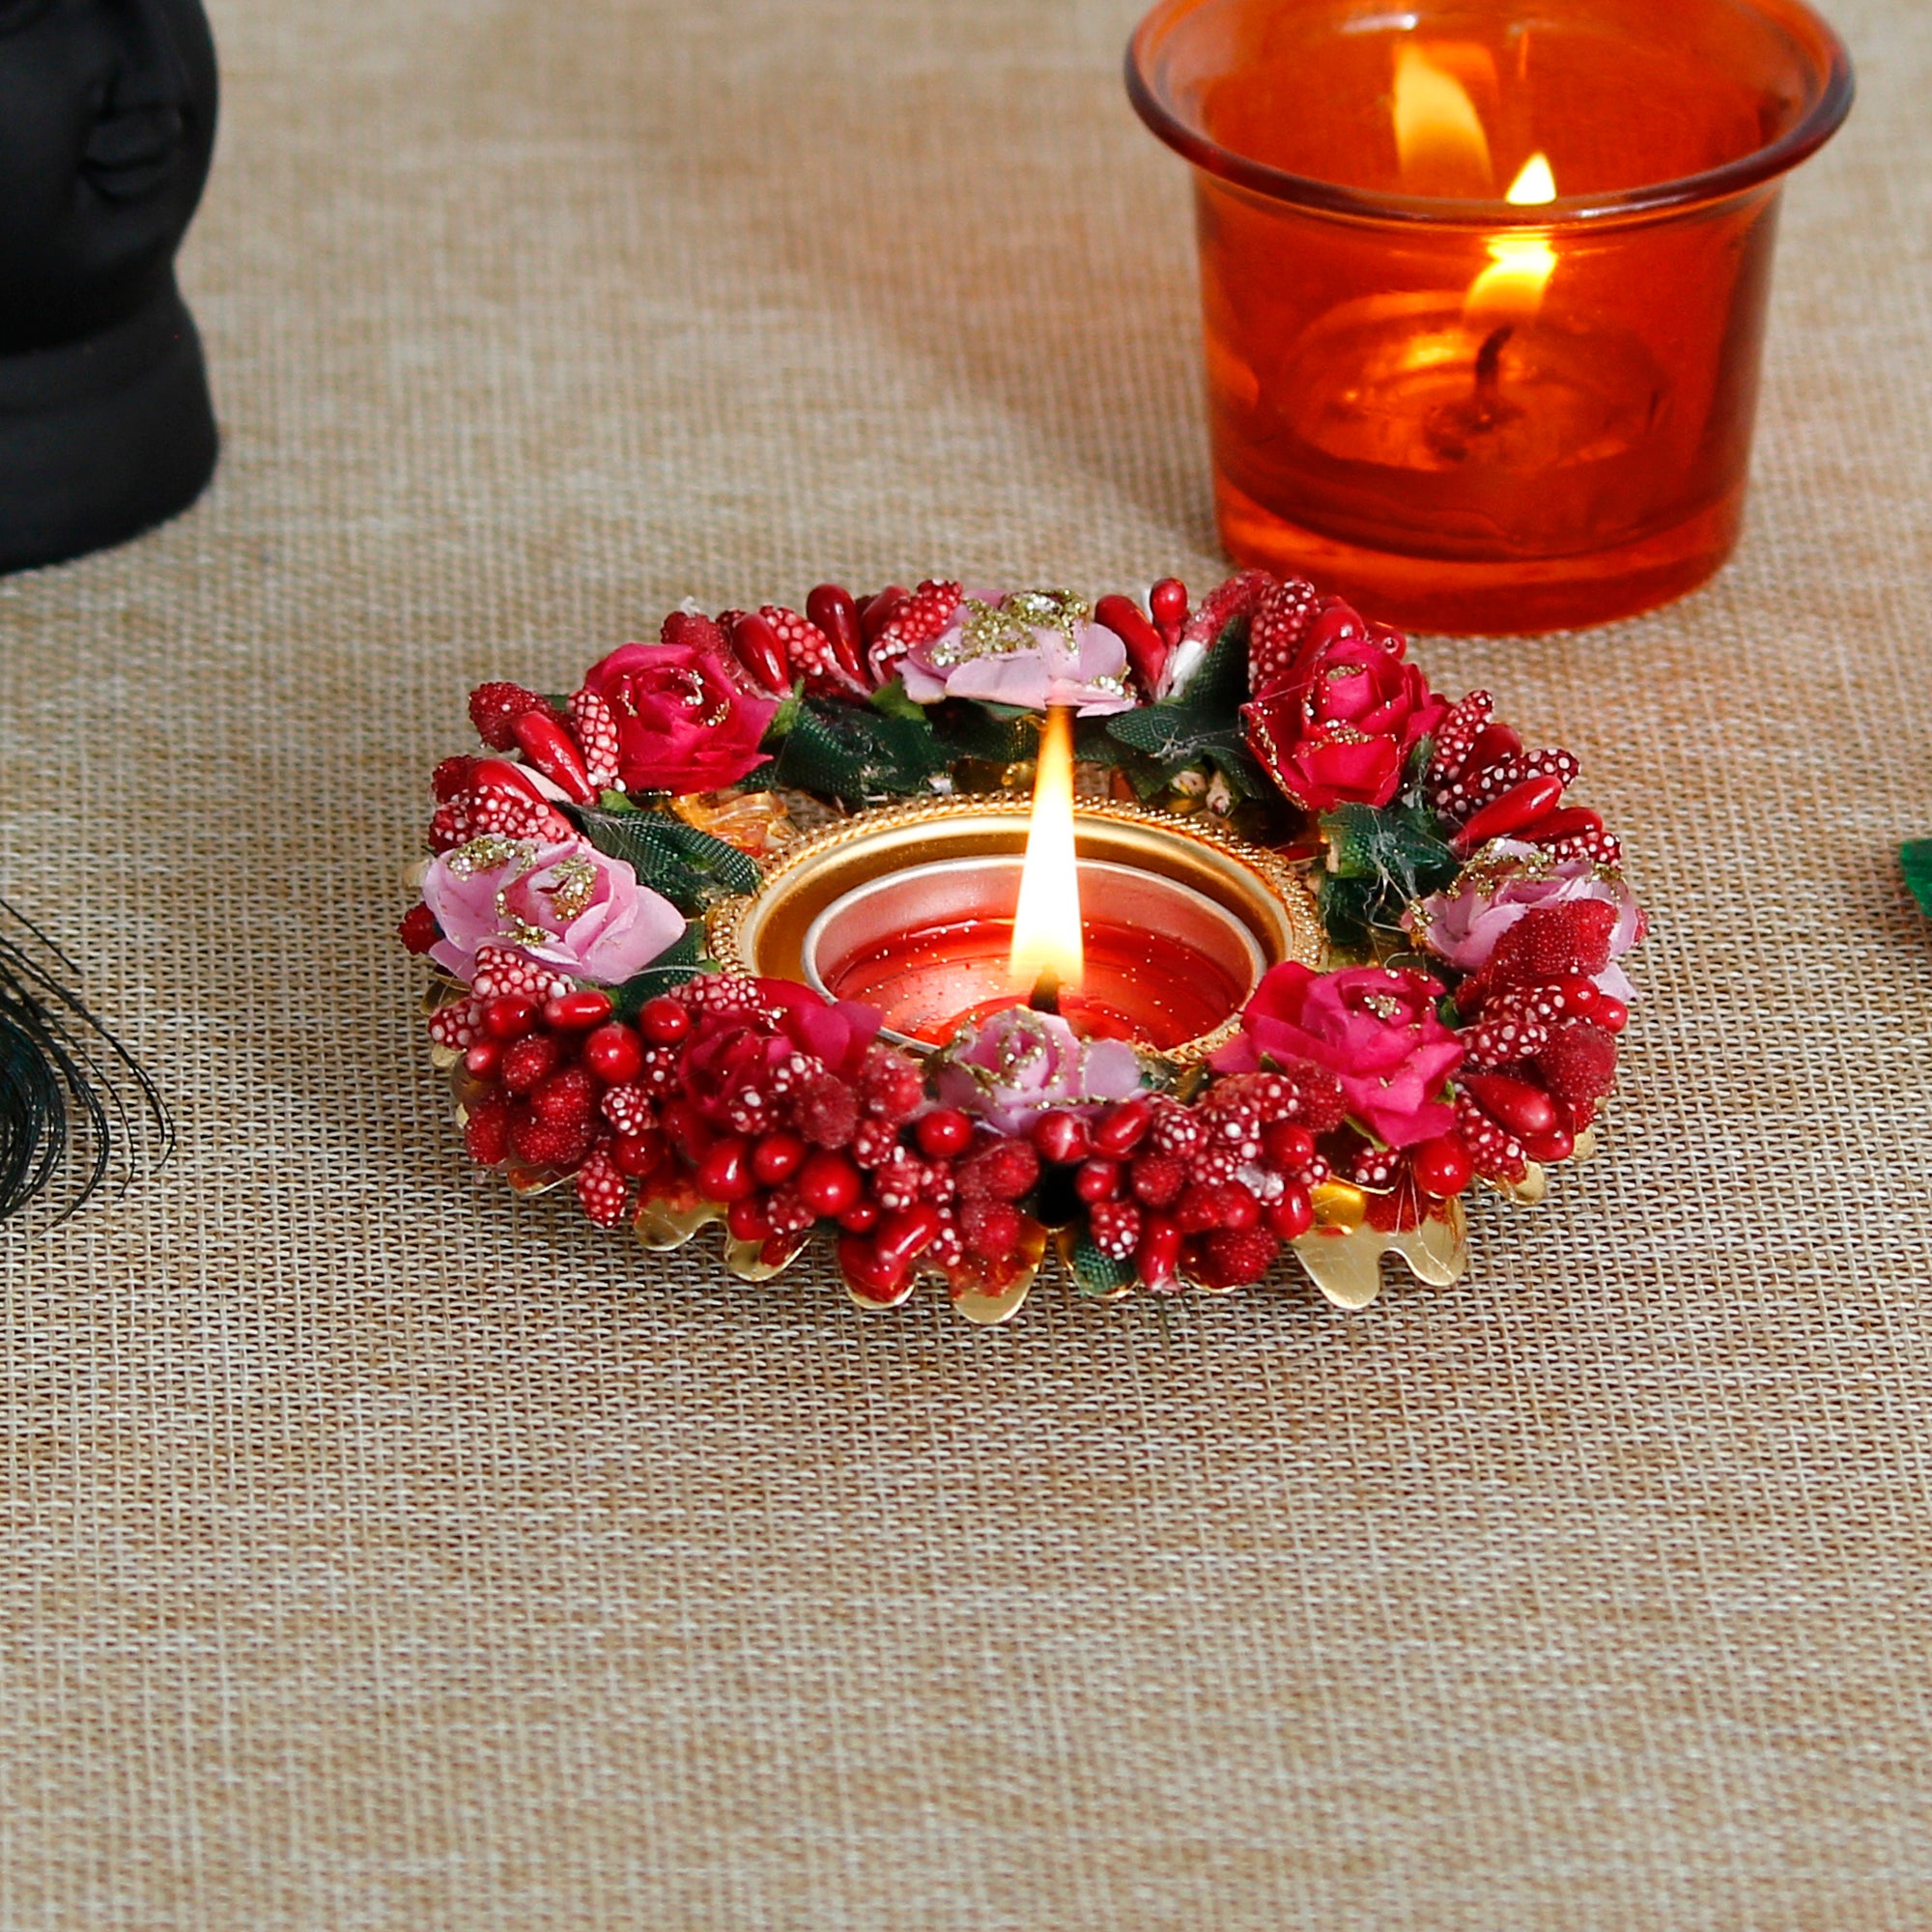 Decorative Handcrafted Red and Pink Floral Tea Light Holder